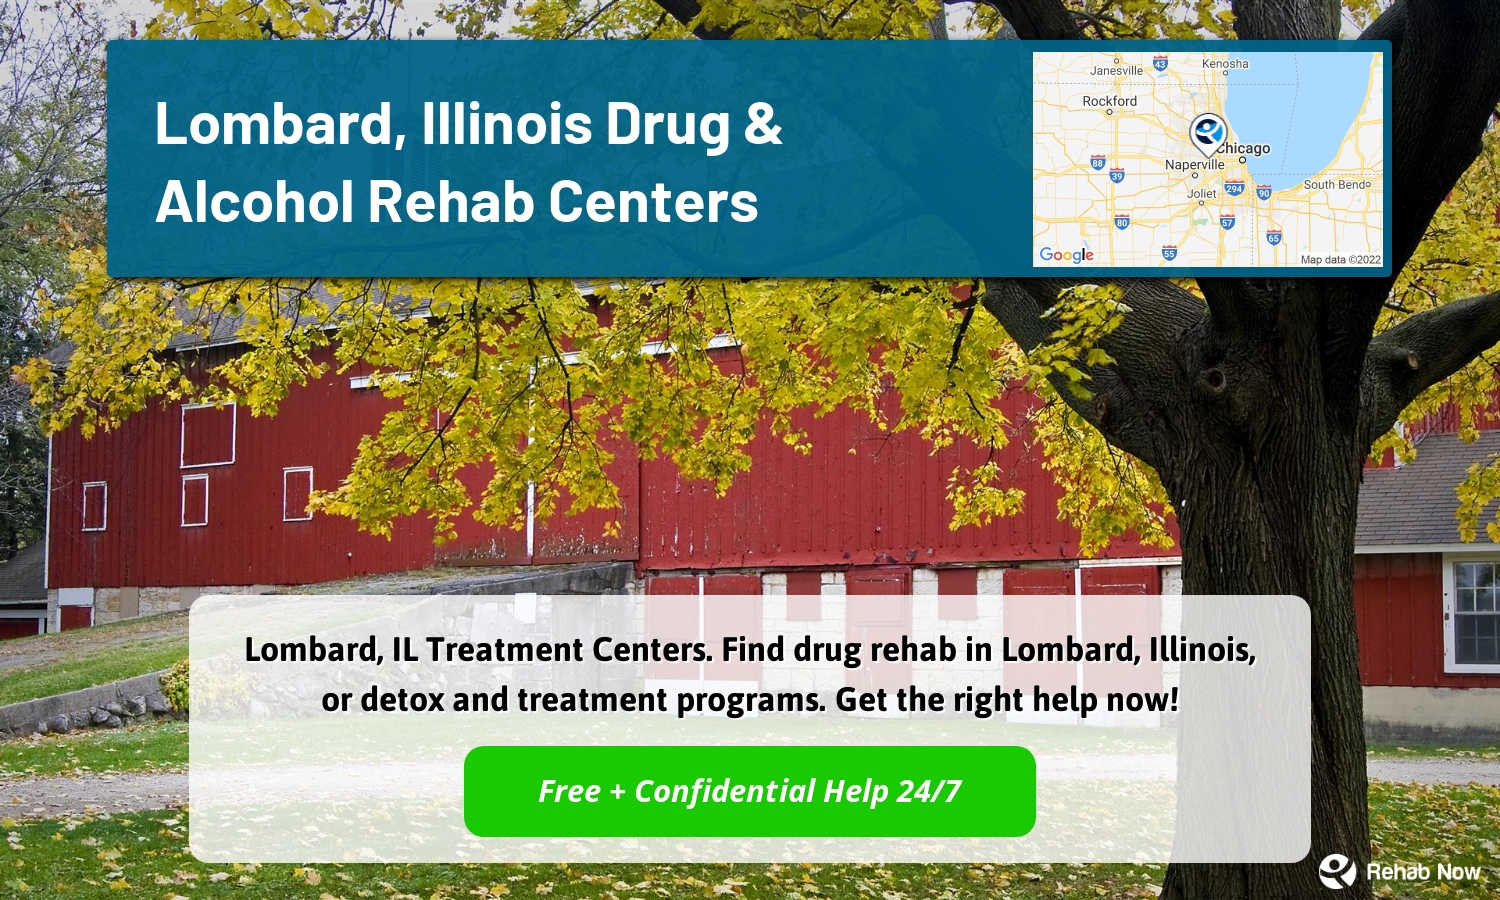 Lombard, IL Treatment Centers. Find drug rehab in Lombard, Illinois, or detox and treatment programs. Get the right help now!